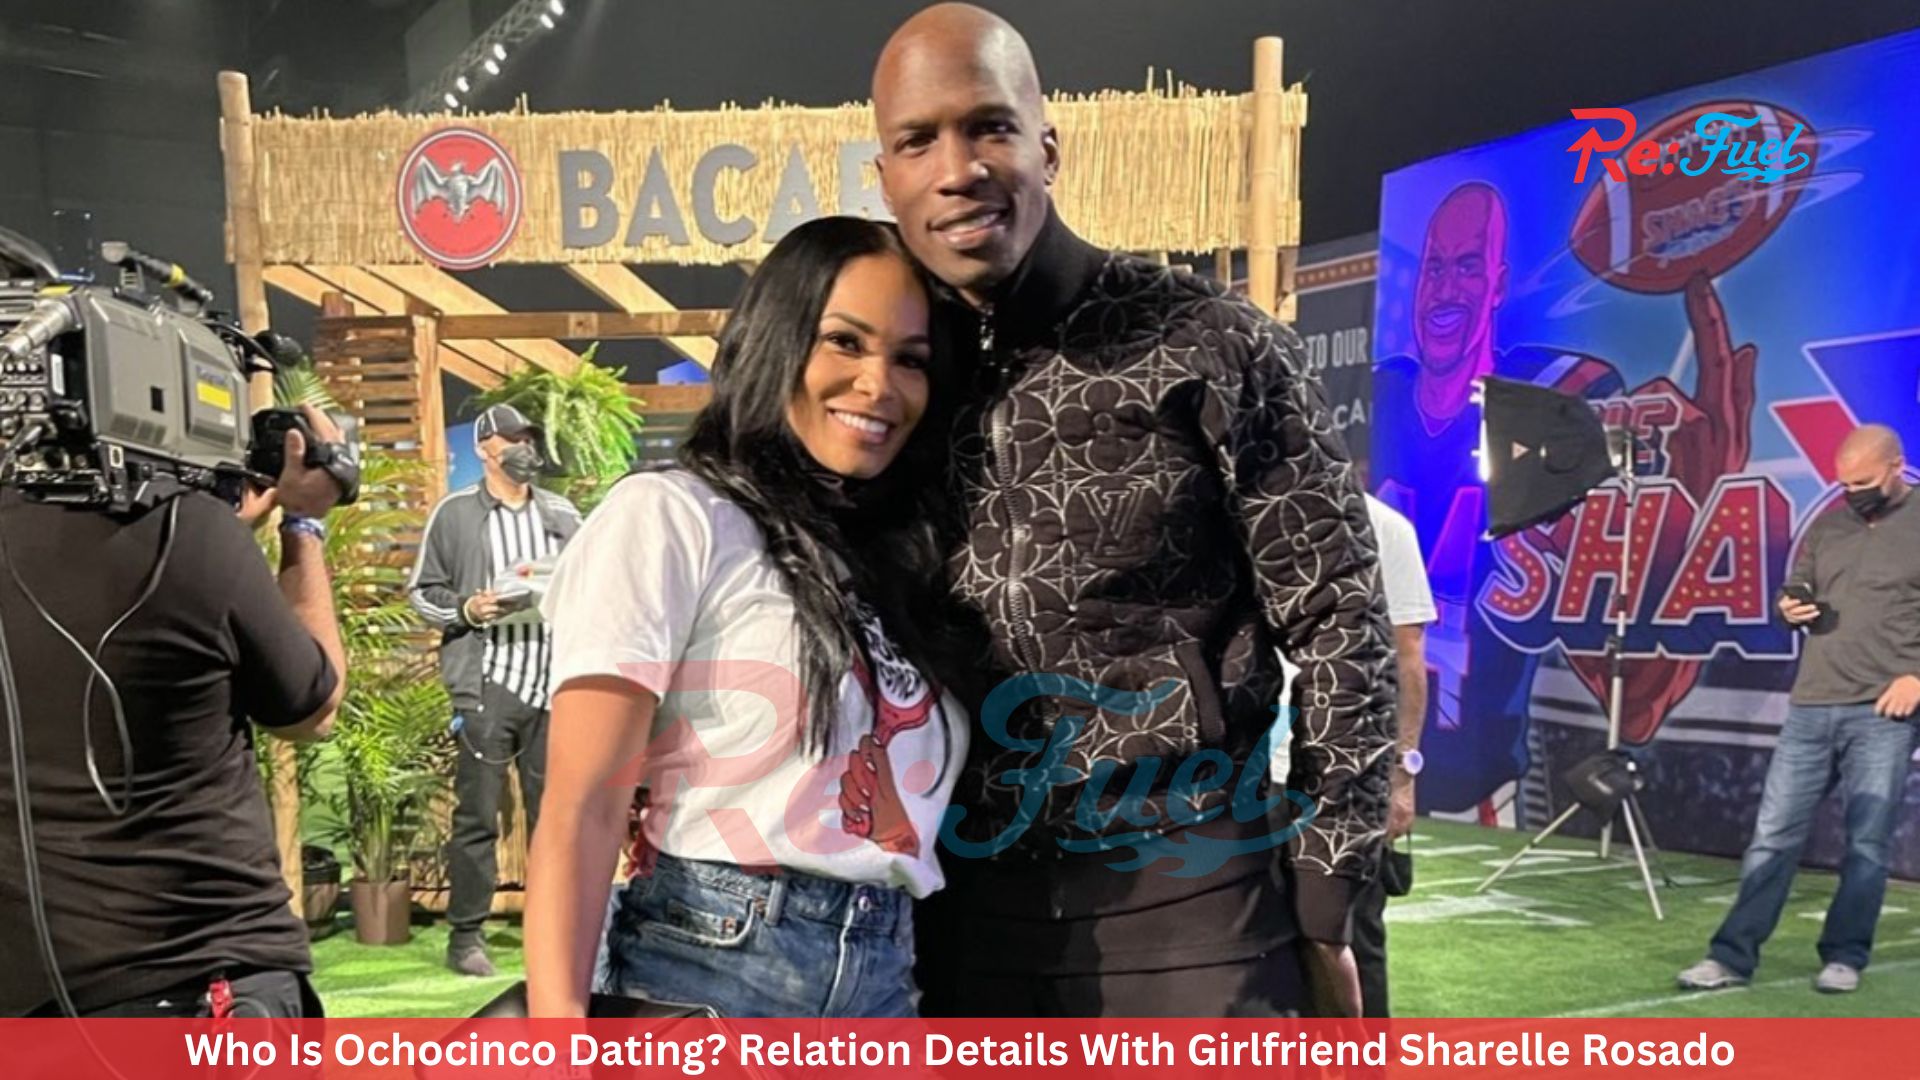 Who Is Ochocinco Dating? Relation Details With Girlfriend Sharelle Rosado